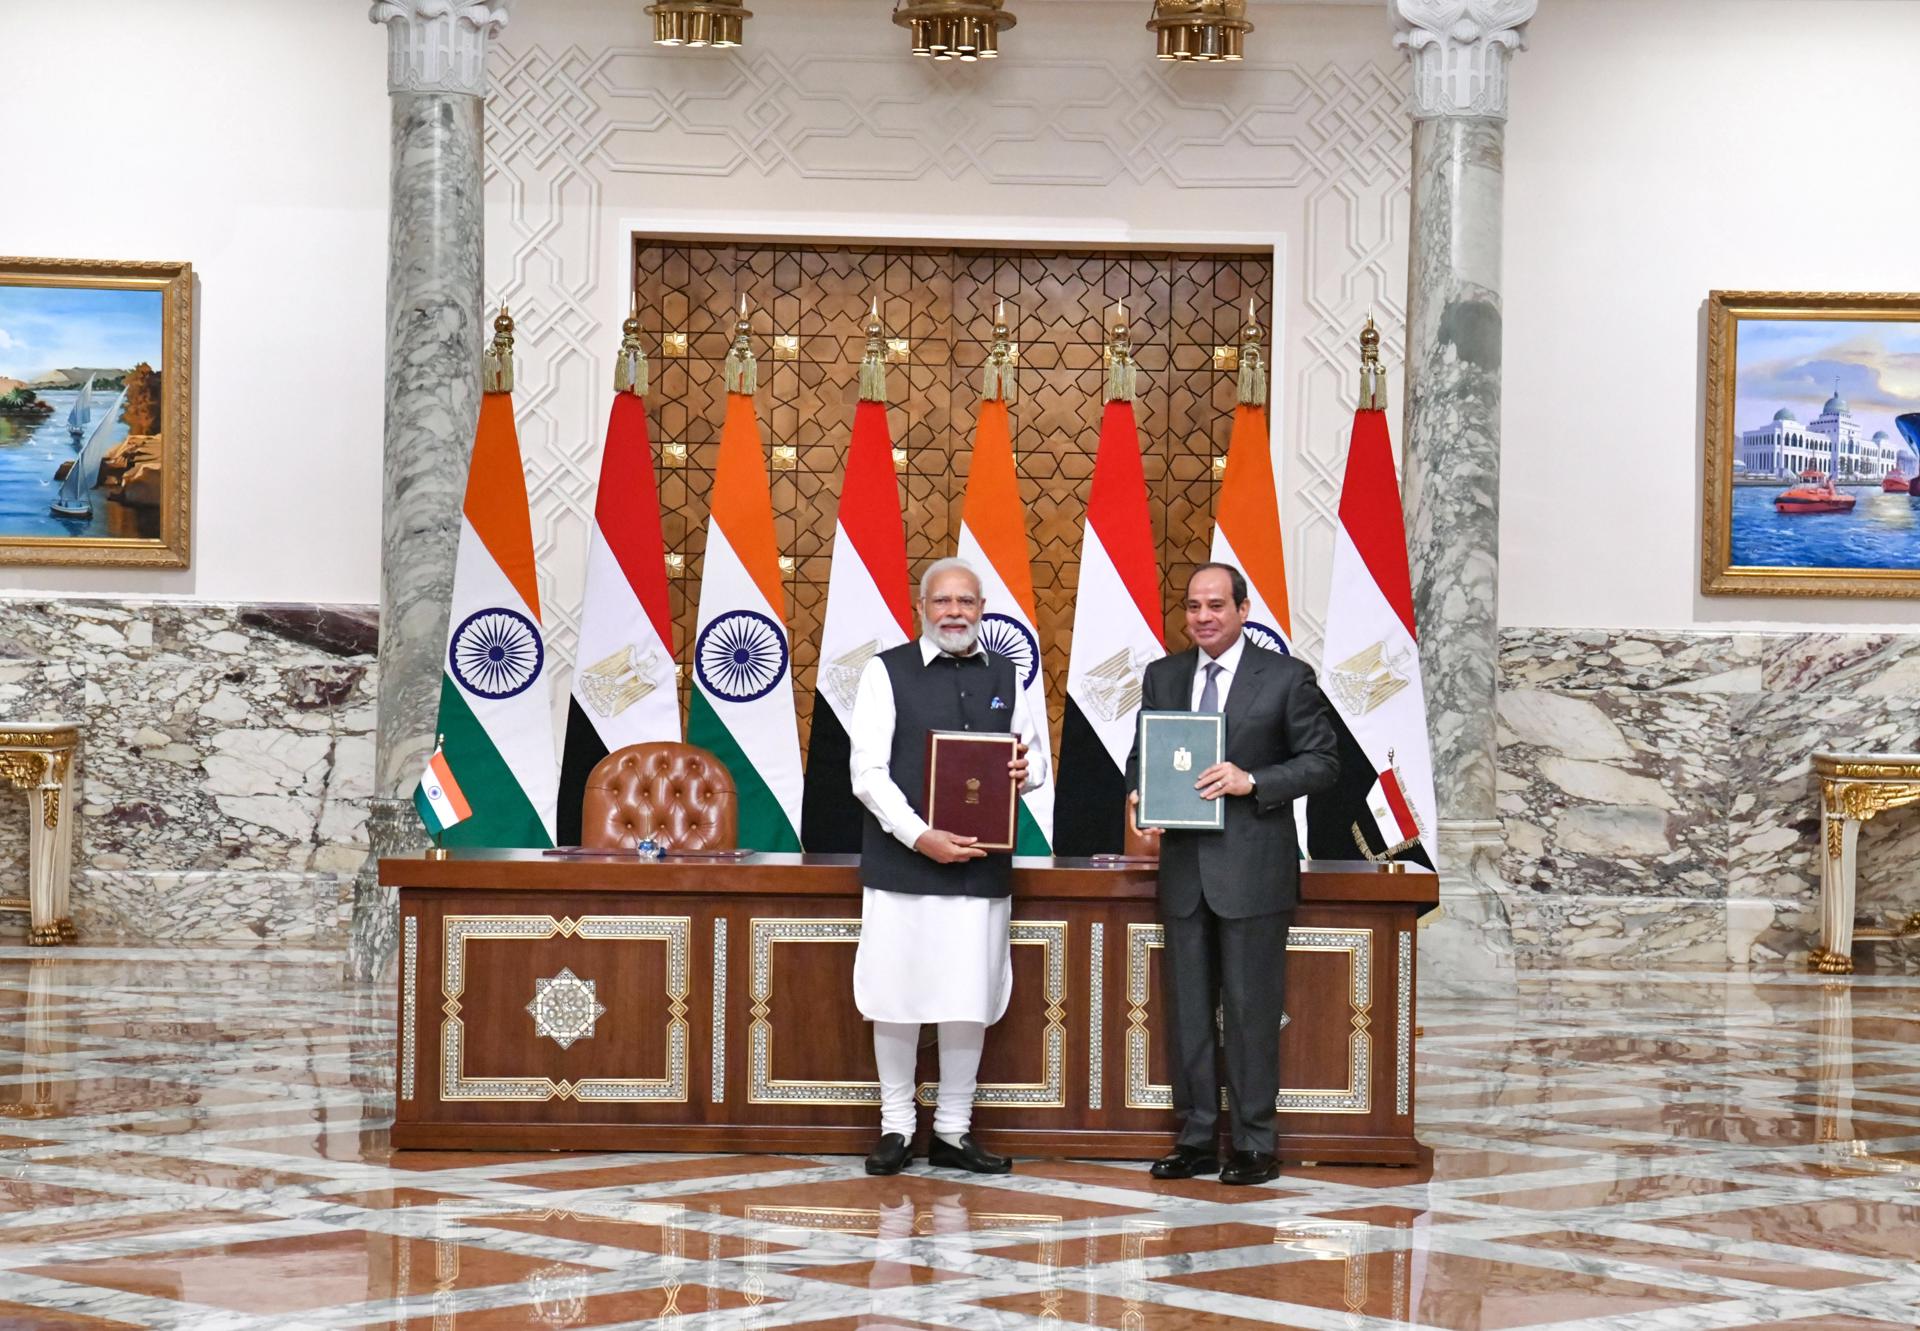 A handout photo made available by Egyptian presidential office shows Egyptian President Abdul Fattah al-Sisi (R) and Indian Prime Minister Narendra Modi (L) posing for a photo after signing a memorandum of understanding, in Cairo, Egypt, 25 June 2023. EFE-EPA/EGYPTIAN PRESIDENTIAL OFFICE HANDOUT HANDOUT EDITORIAL USE ONLY/NO SALES